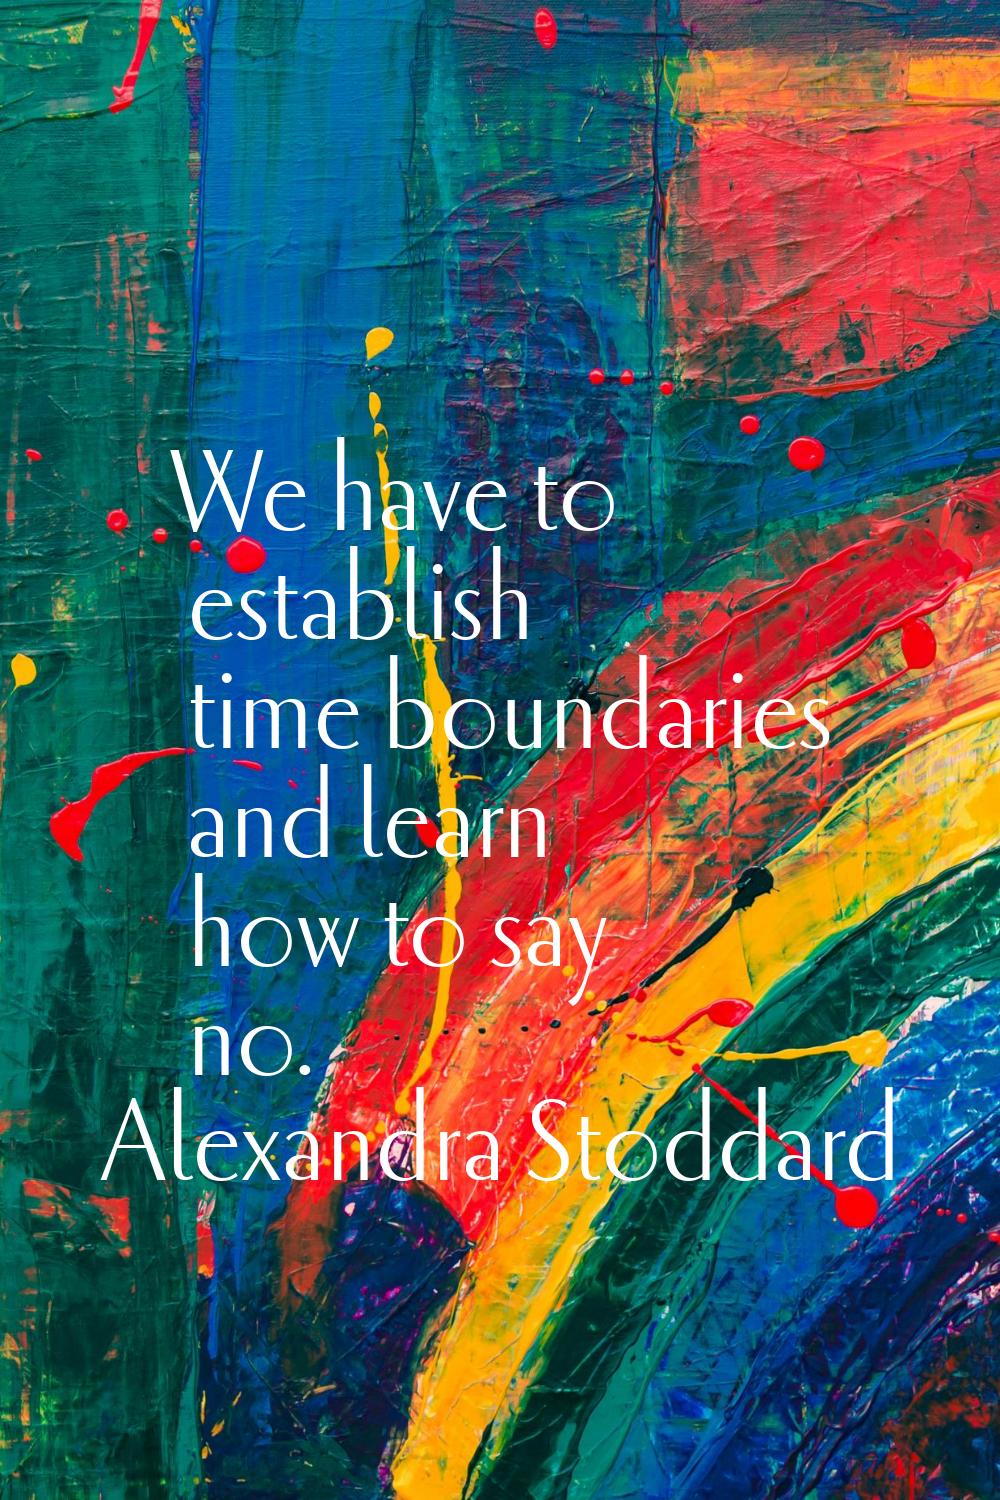 We have to establish time boundaries and learn how to say no.